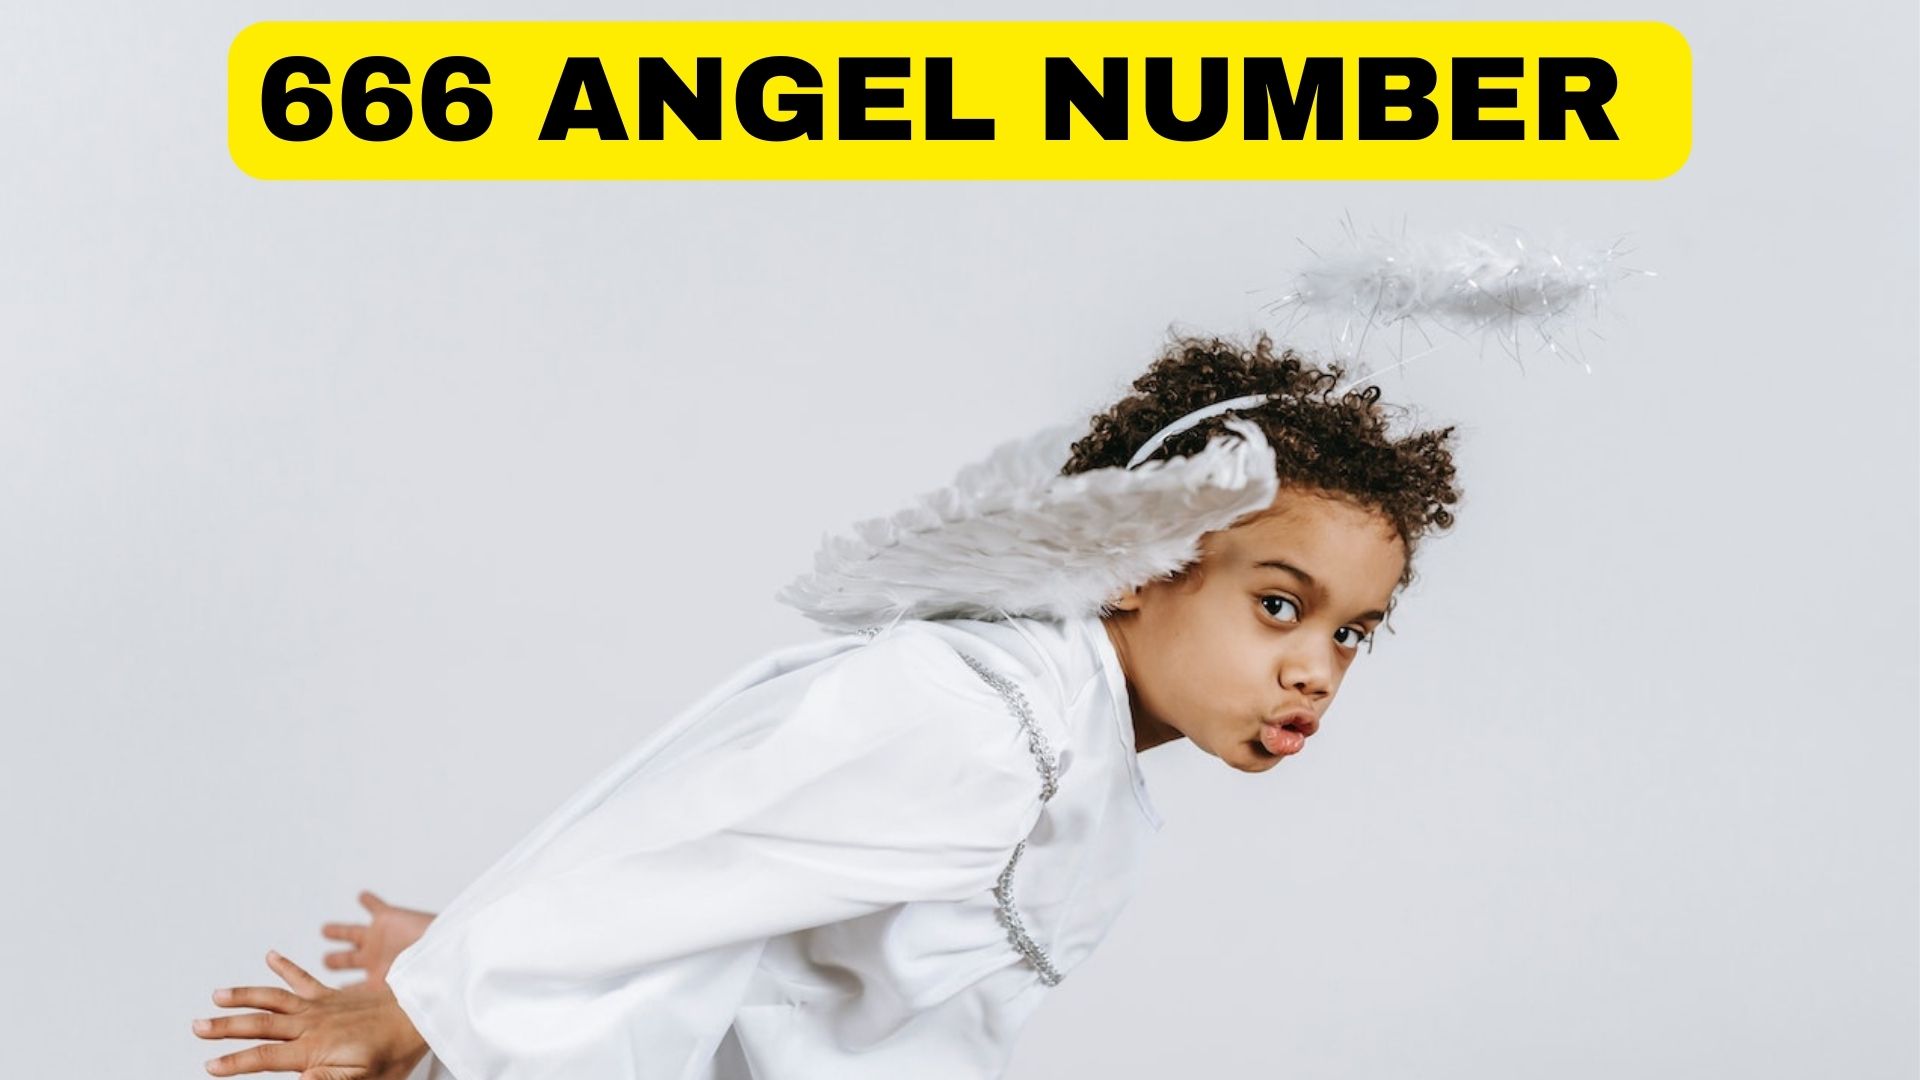 666 Angel Number - A Sign Of Balance